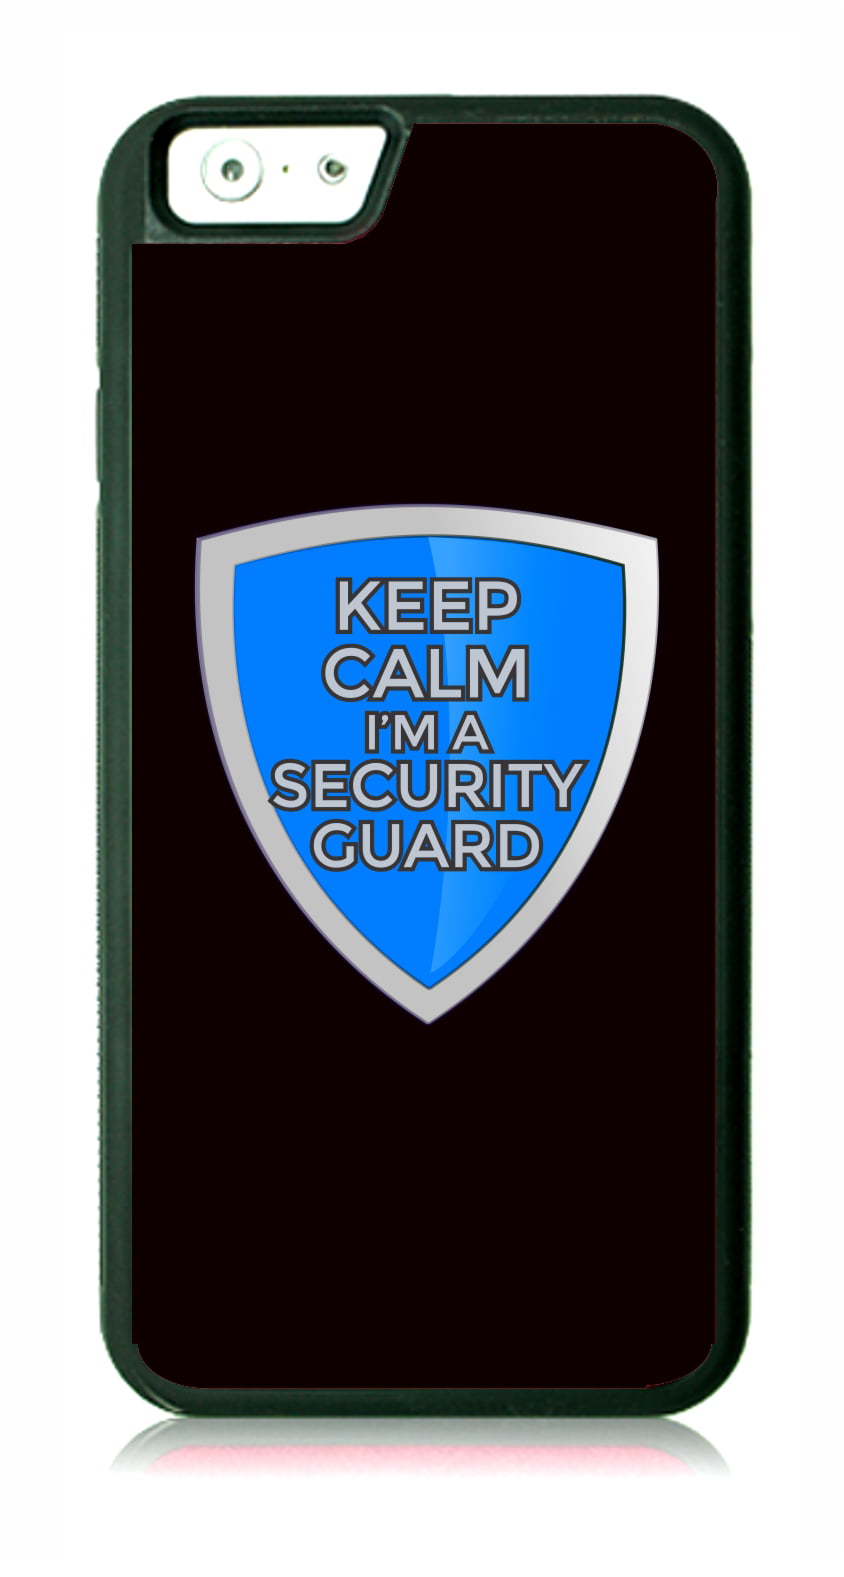 Keep Calm I'm a Security Guard - Appreciation Black Rubber Case for the Apple iPhone 6 iPhone 6s - iPhone 6 Accessories - Accessories - Walmart.com